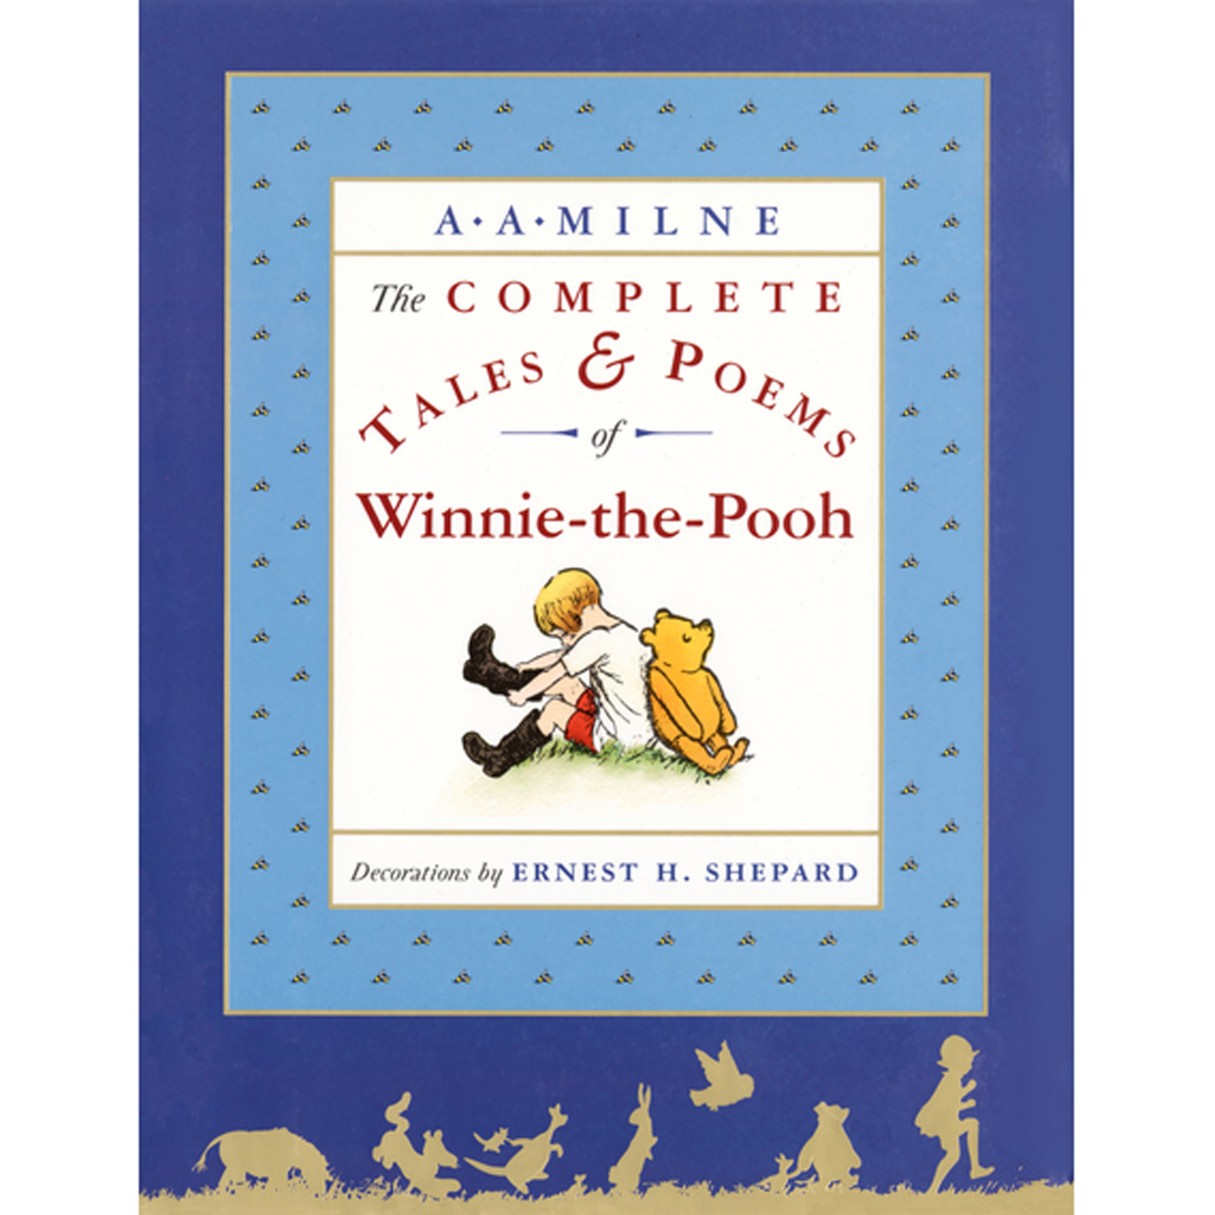 Winnie-the-Pooh The Complete Tales & Poems Book